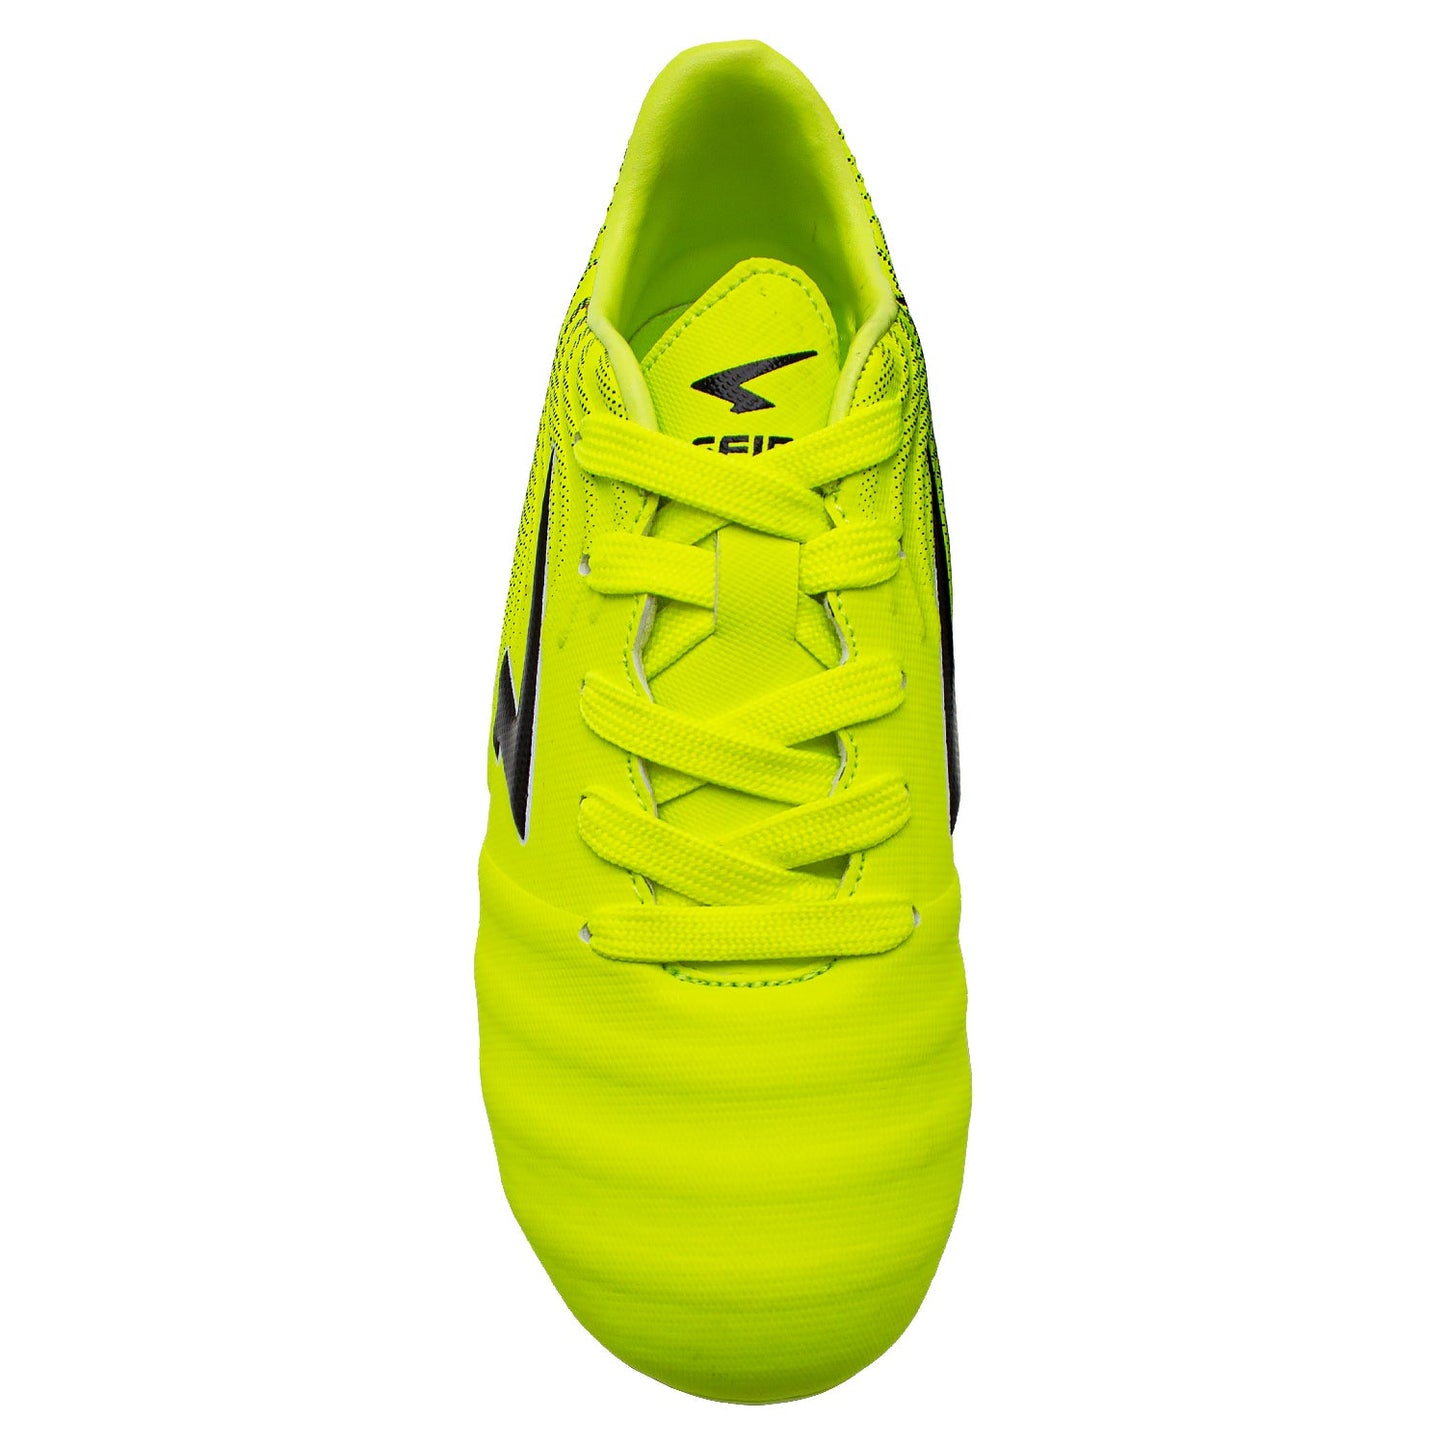 Swell Junior Football Boots - Lime/Black